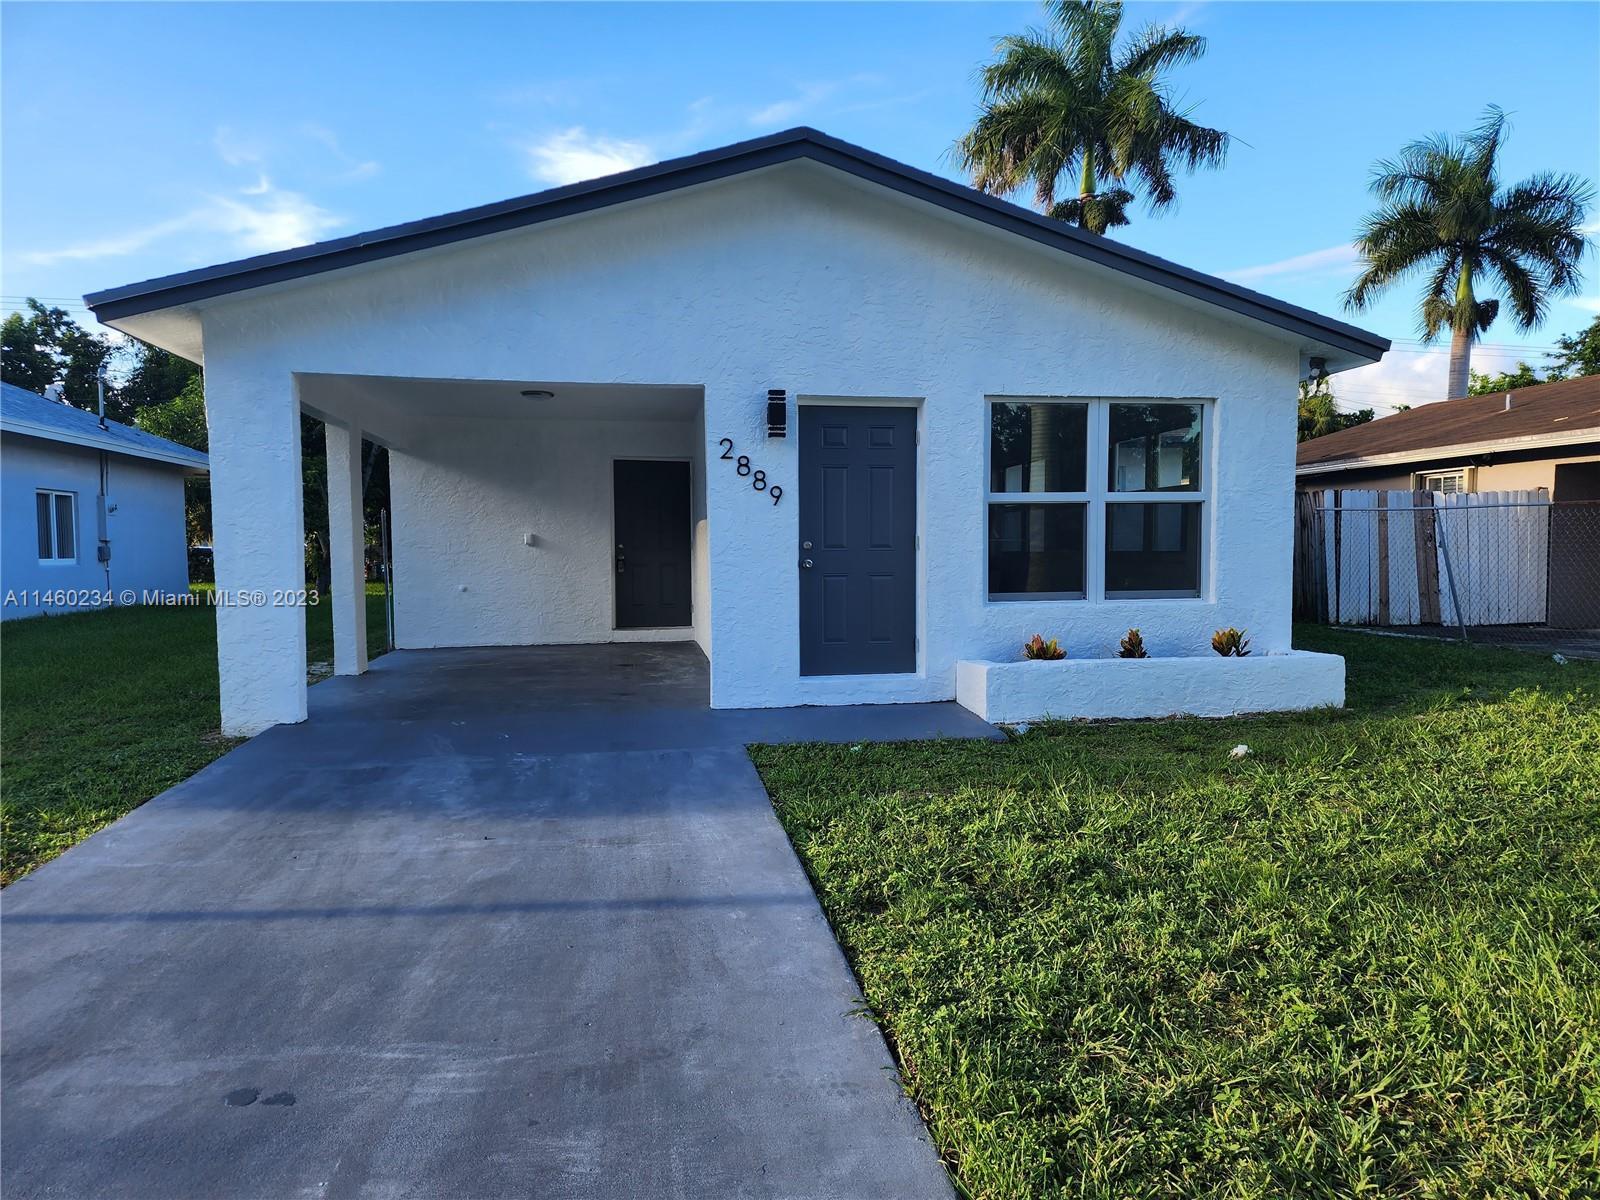 Nice charming single family home in the heart of Sunrise Florida. 3bd/2baths fully renovated with ne